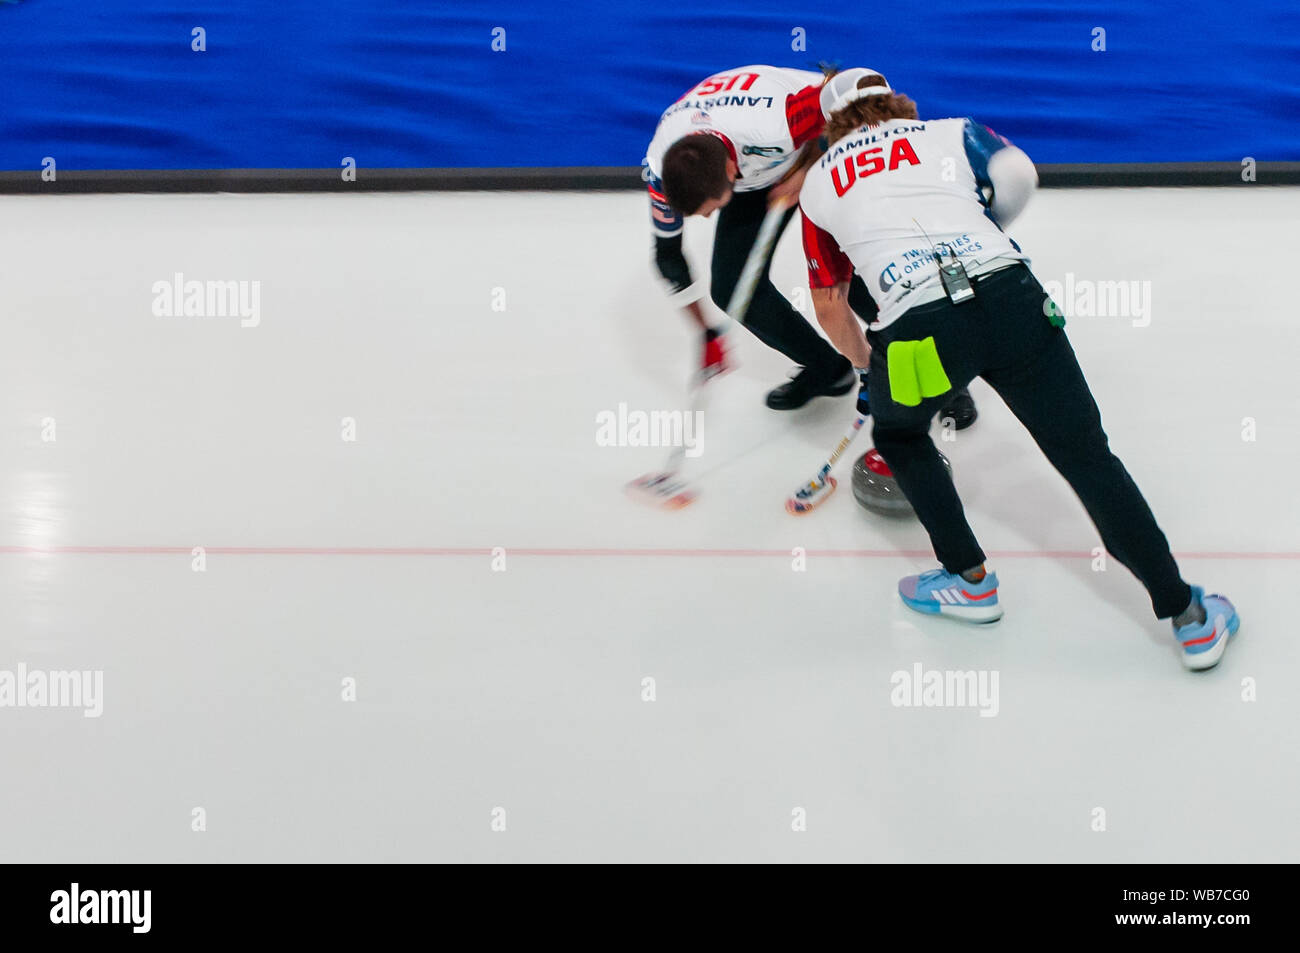 Raleigh, North Carolina, USA. 24th Aug, 2019. Aug. 24, 2019 Ã RALEIGH, N.C., US - JOHN LANDSTEINER and MATT HAMILTON of the United States in action during Curling Night in America at the Raleigh Ice Plex. Curling Night in America featured members of the U.S. Olympic menÃs gold medal team from the 2018 Winter Olympics in South Korea, the U.S. womenÃs team, as well as teams from Italy, Japan, and Scotland, Aug. 22-24, 2019. Credit: Timothy L. Hale/ZUMA Wire/Alamy Live News Stock Photo